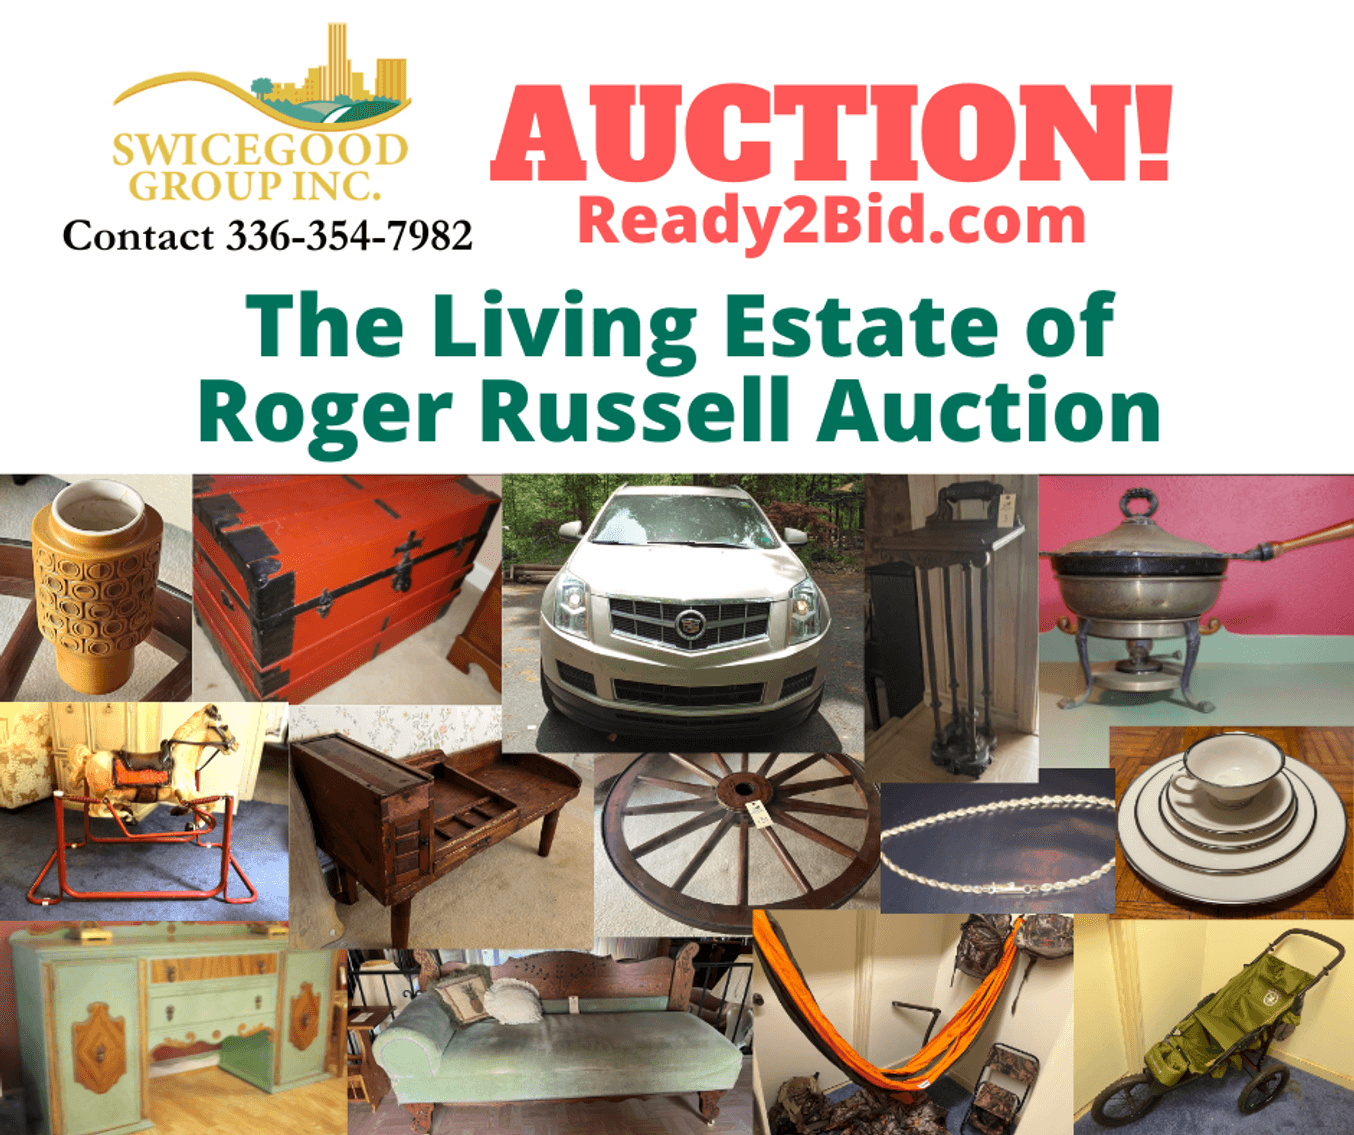 The Living Estate of Roger Russell Auction